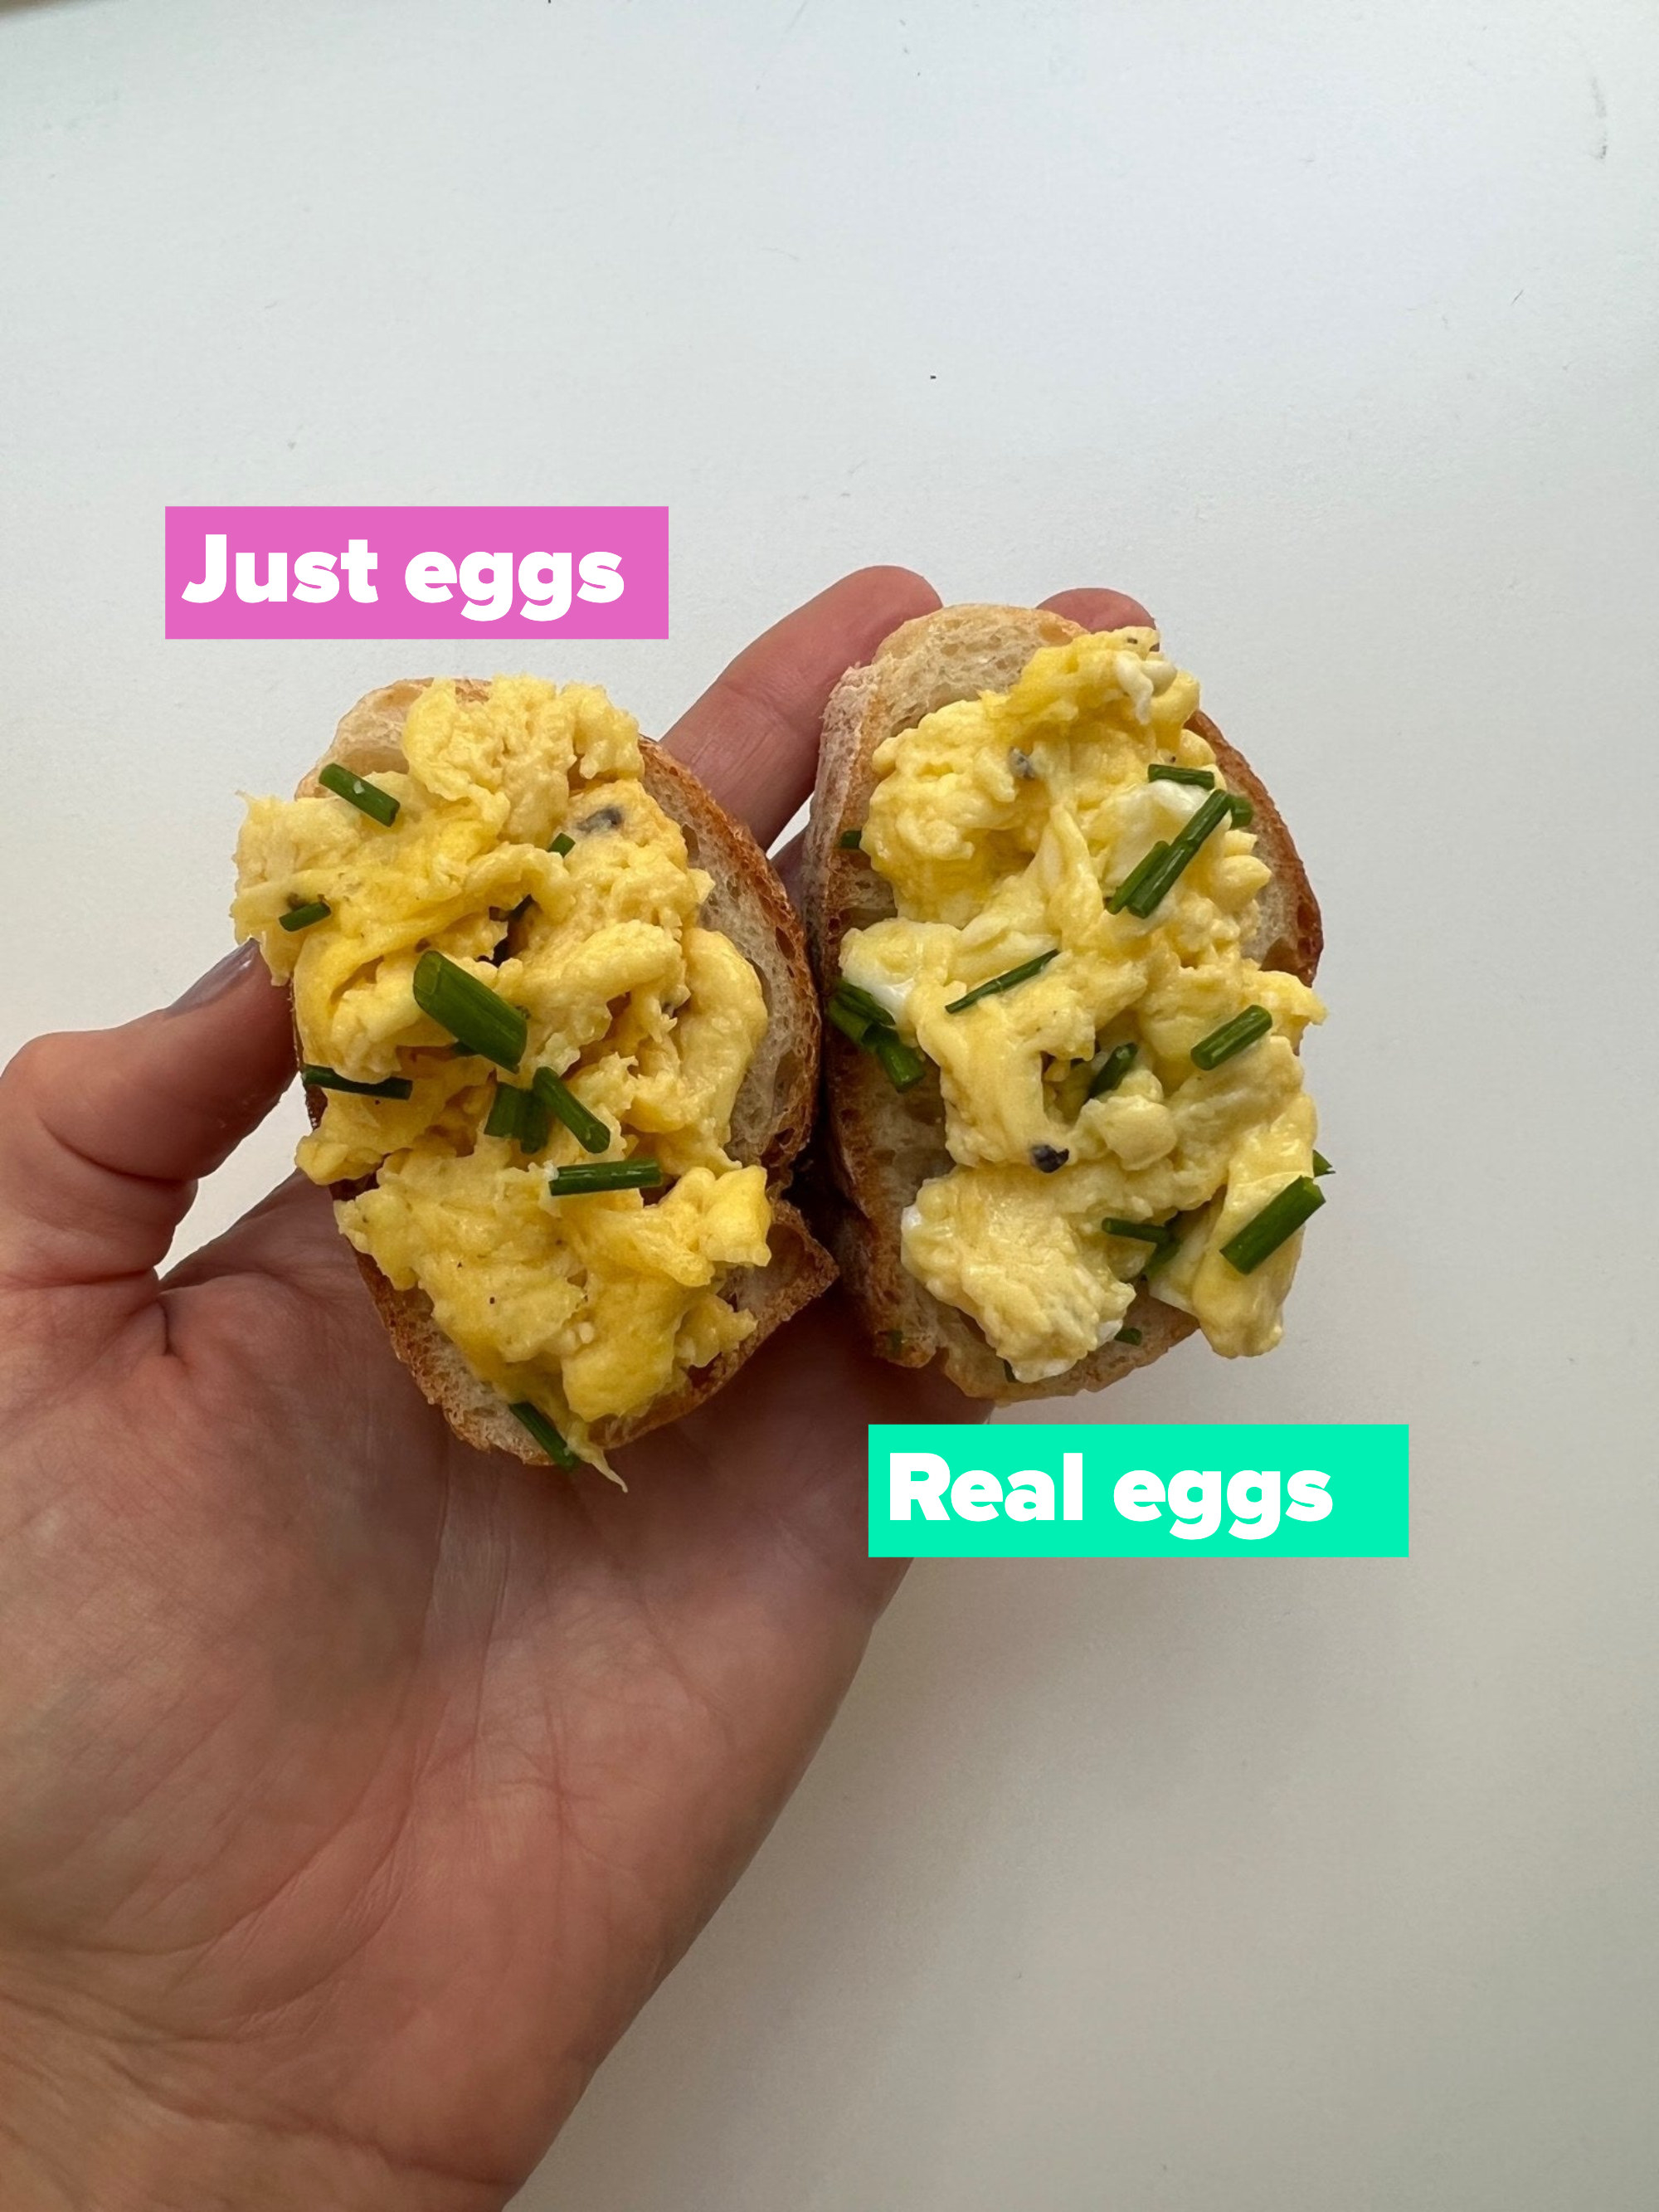 Eggs and plant-based eggs on two pieces of bread.